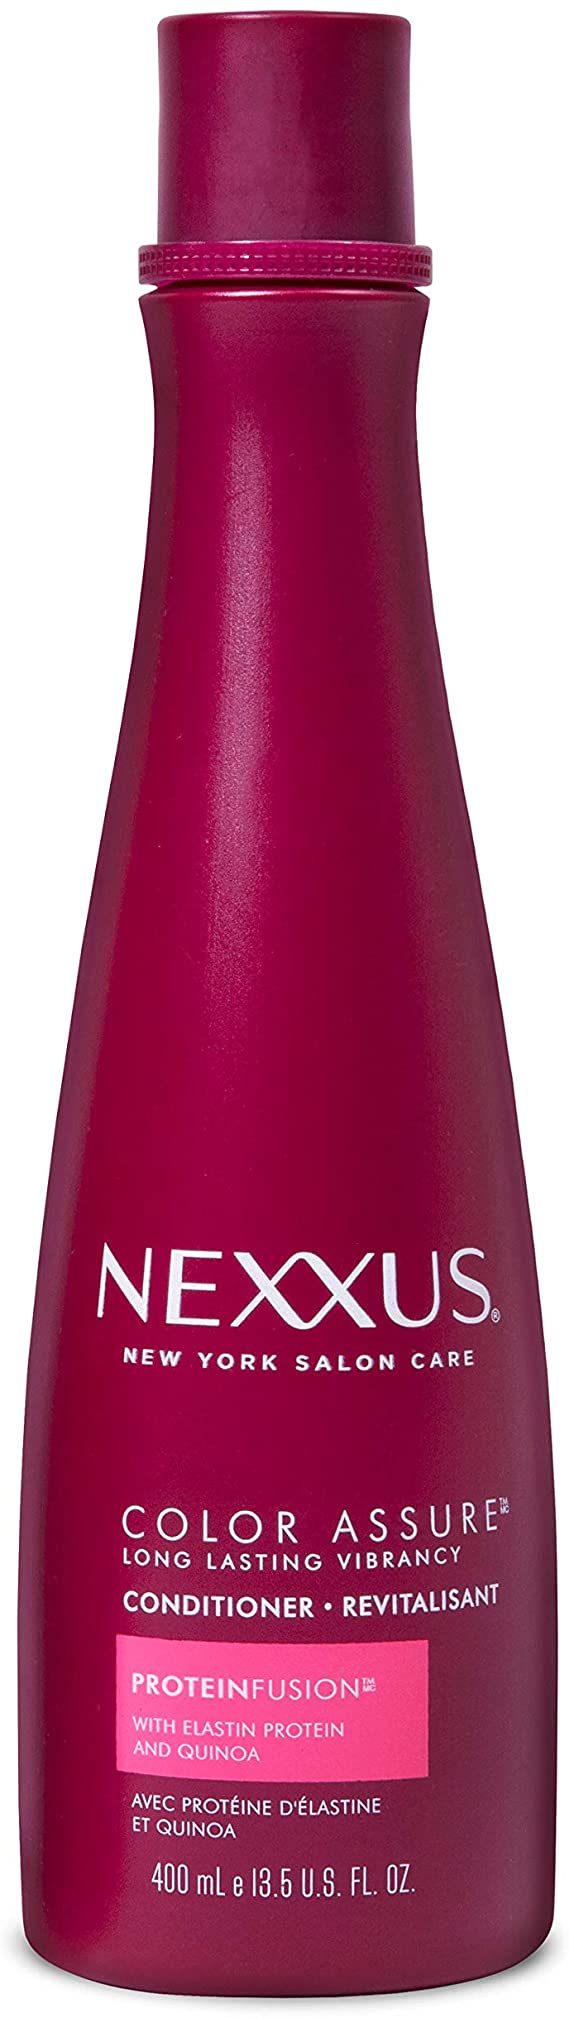 Nexxus Conditioner for colour treated hair Colour Assure stay vibrant up to 40 washes 400 ml